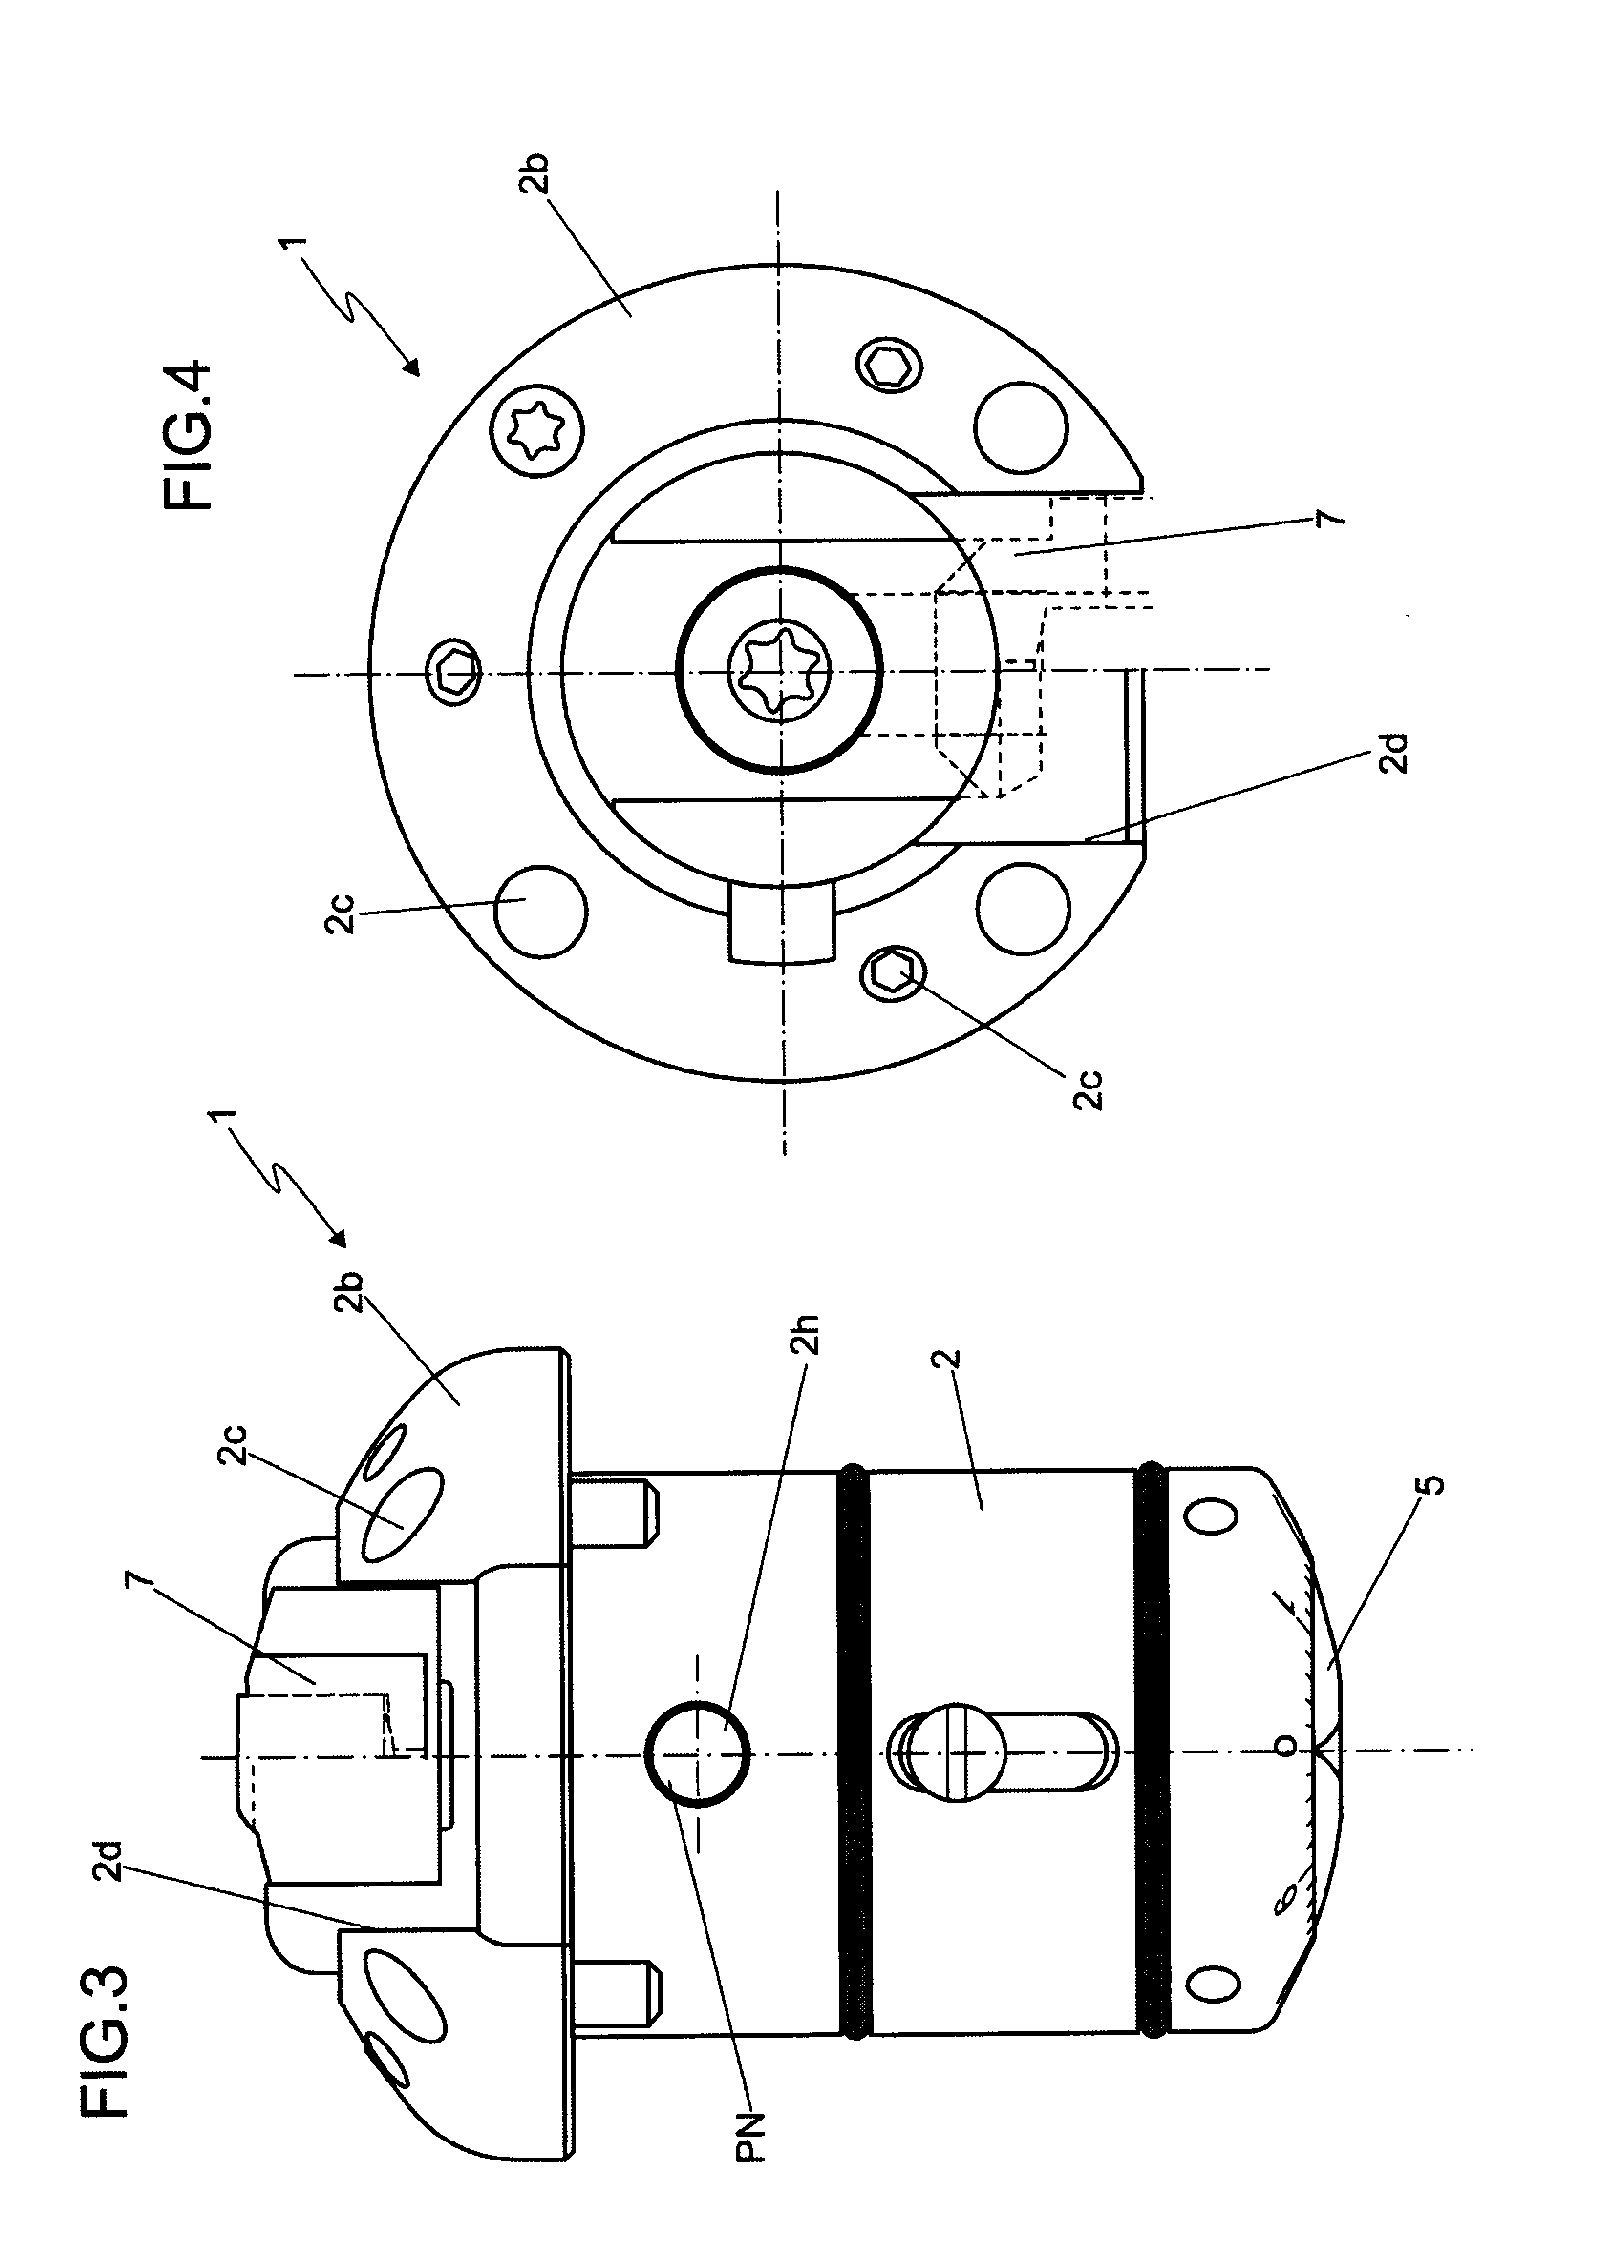 Cartridge with fine-adjustment positioning click used on a boring bar